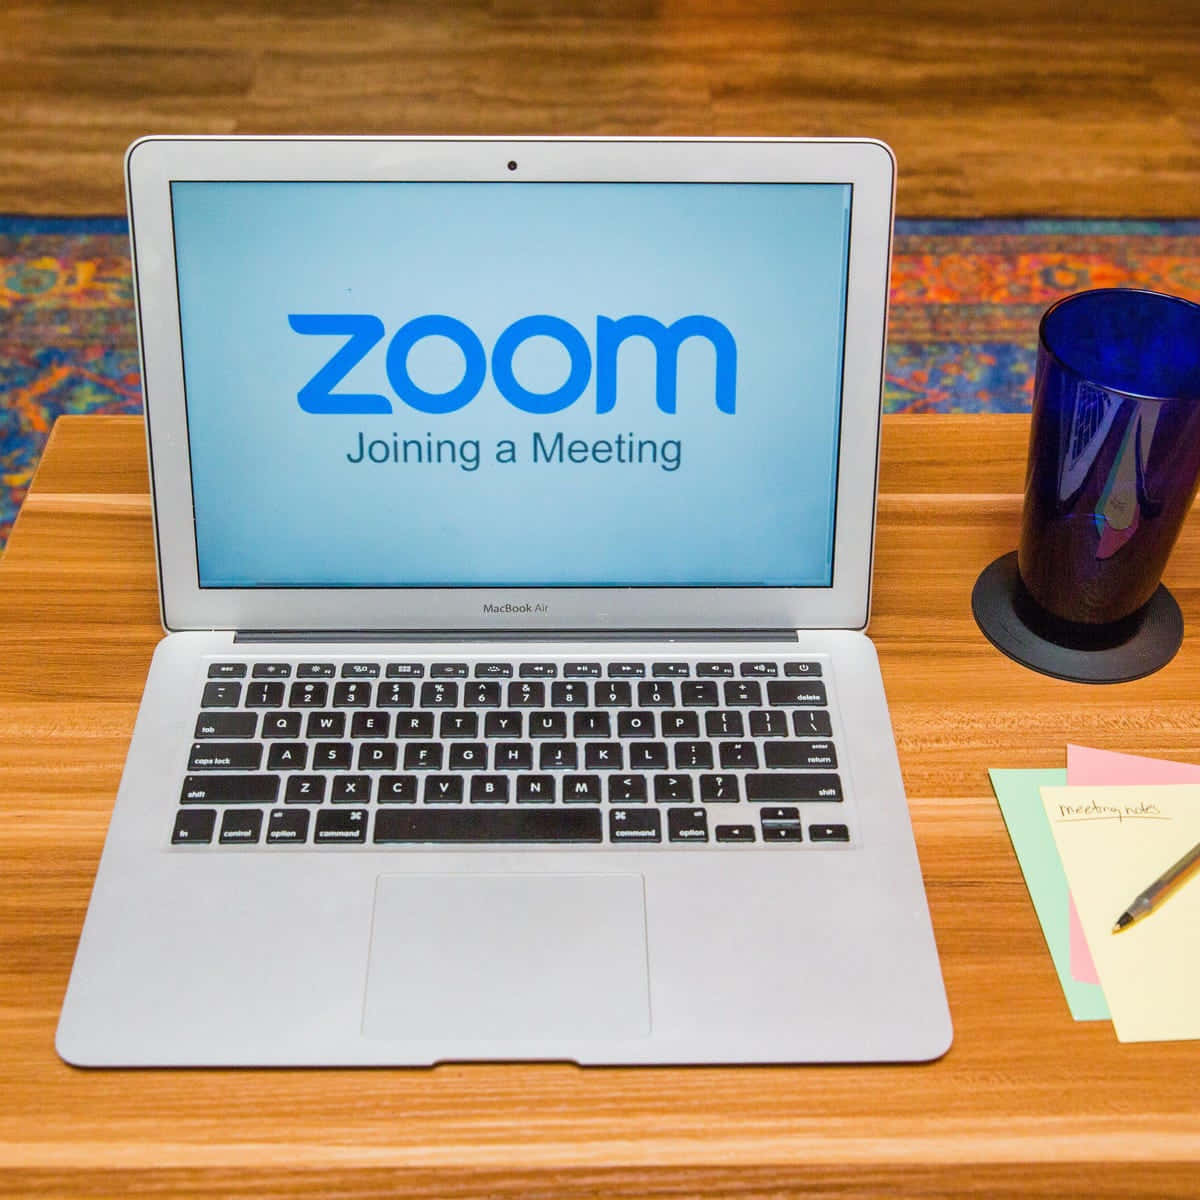 Zoom Joining A Meeting